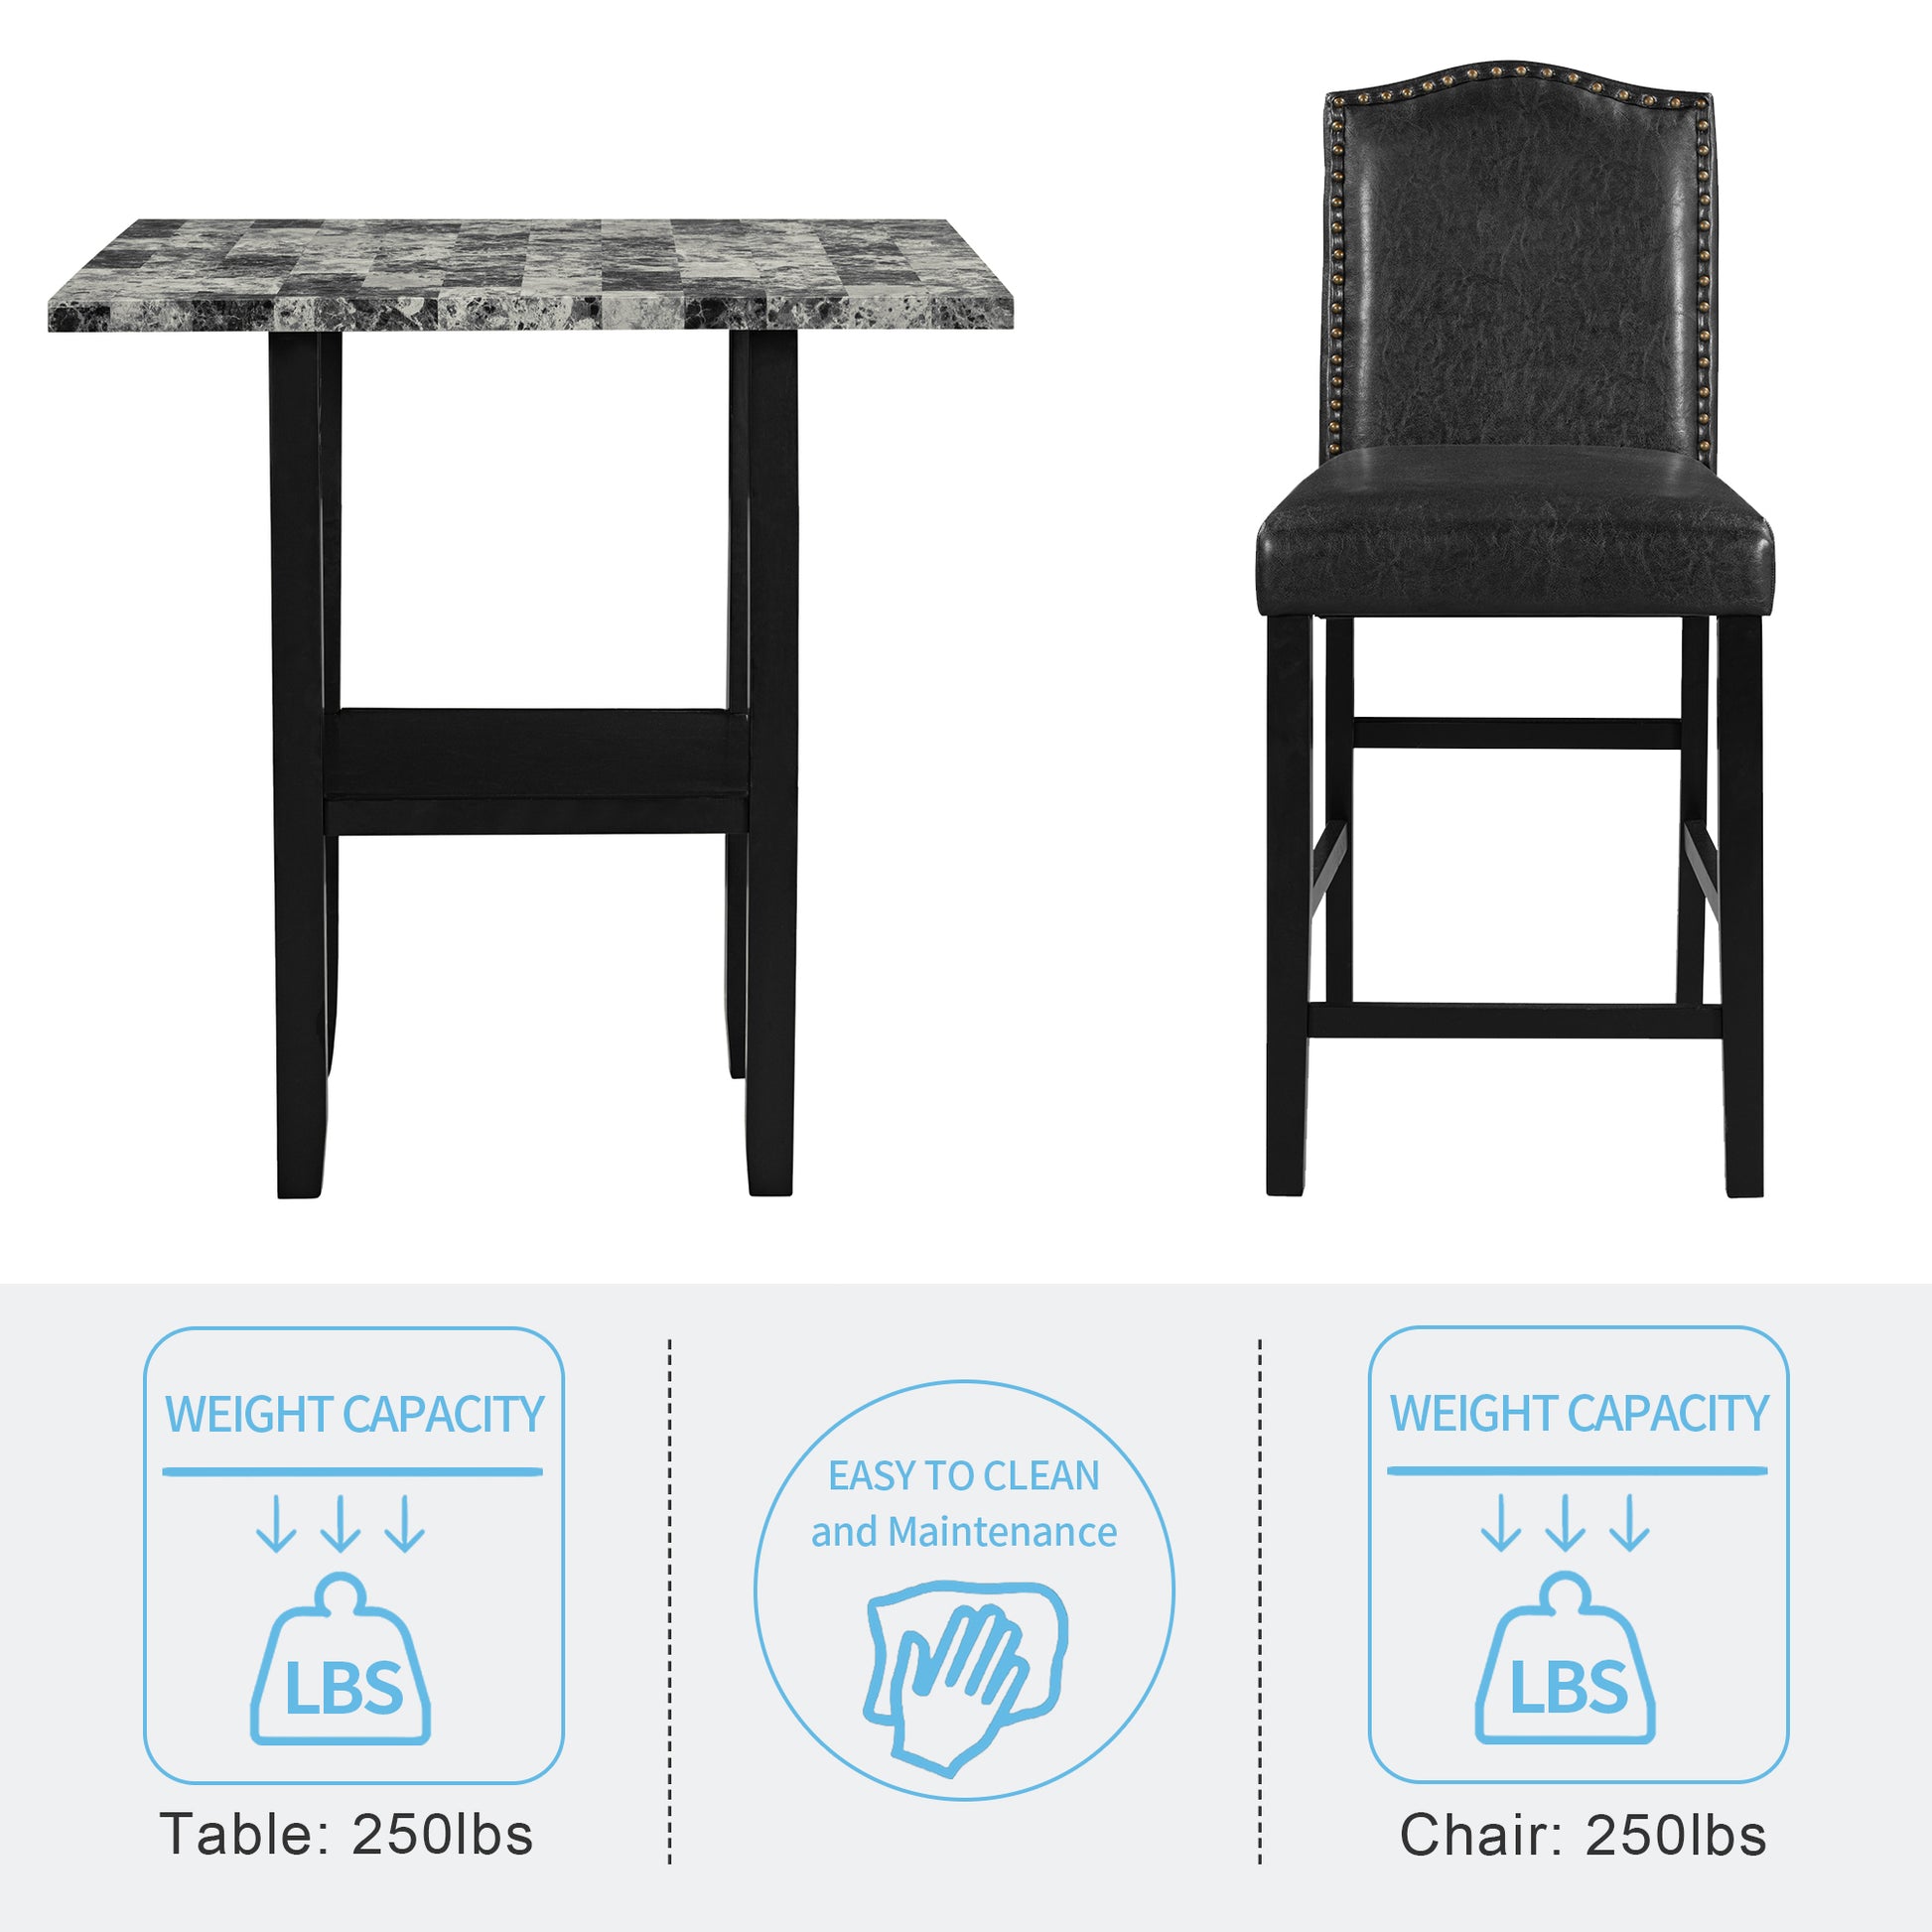 5 Piece Counter Height Dining Set